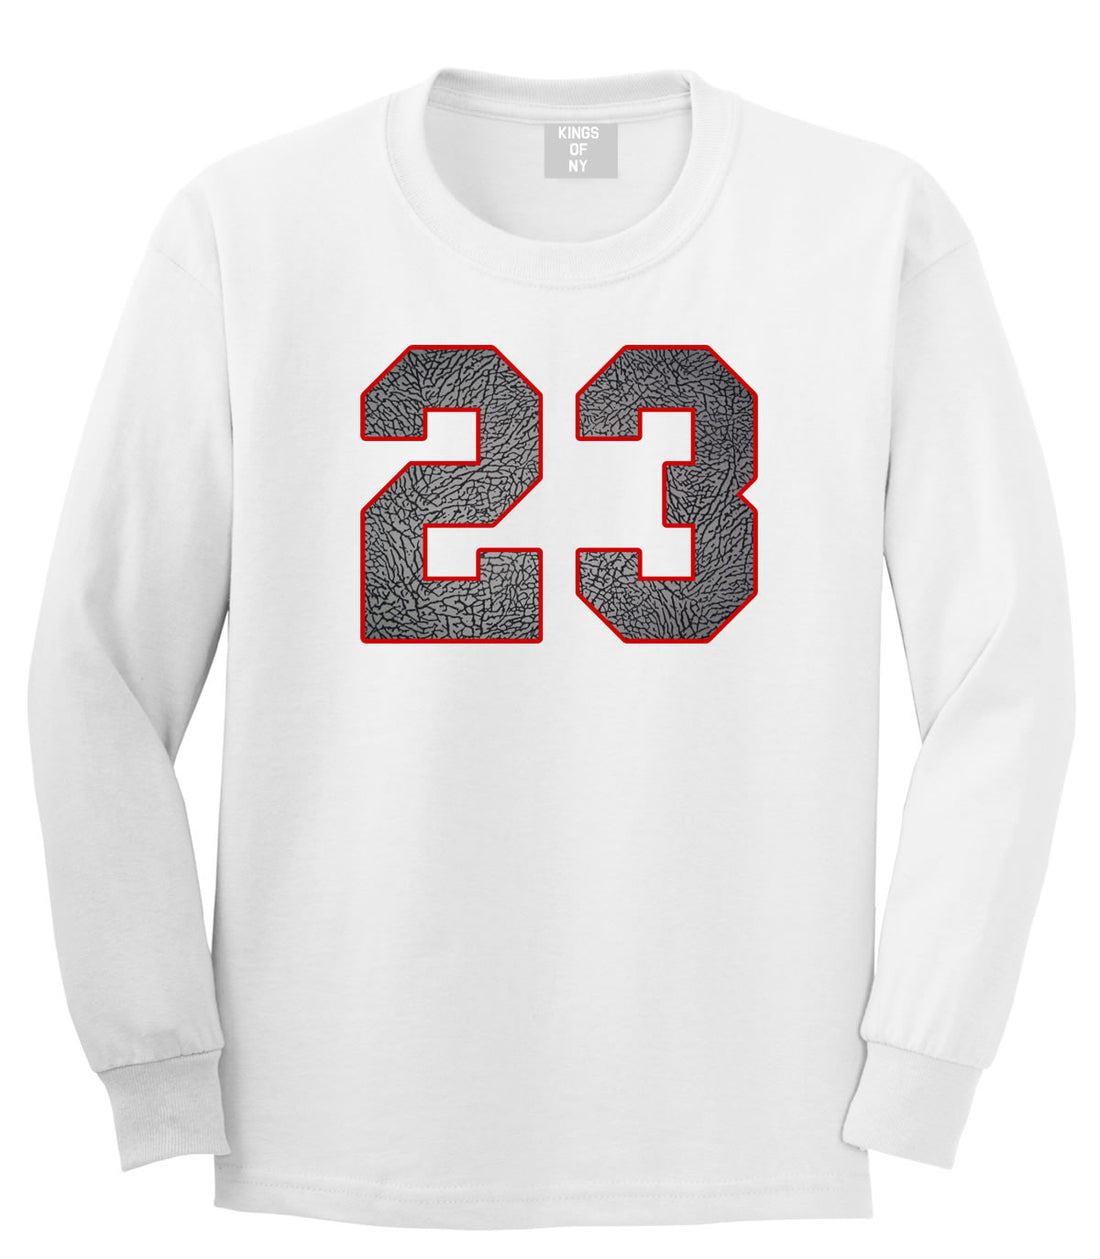 23 Cement Red Jersey Long Sleeve T-Shirt in White By Kings Of NY